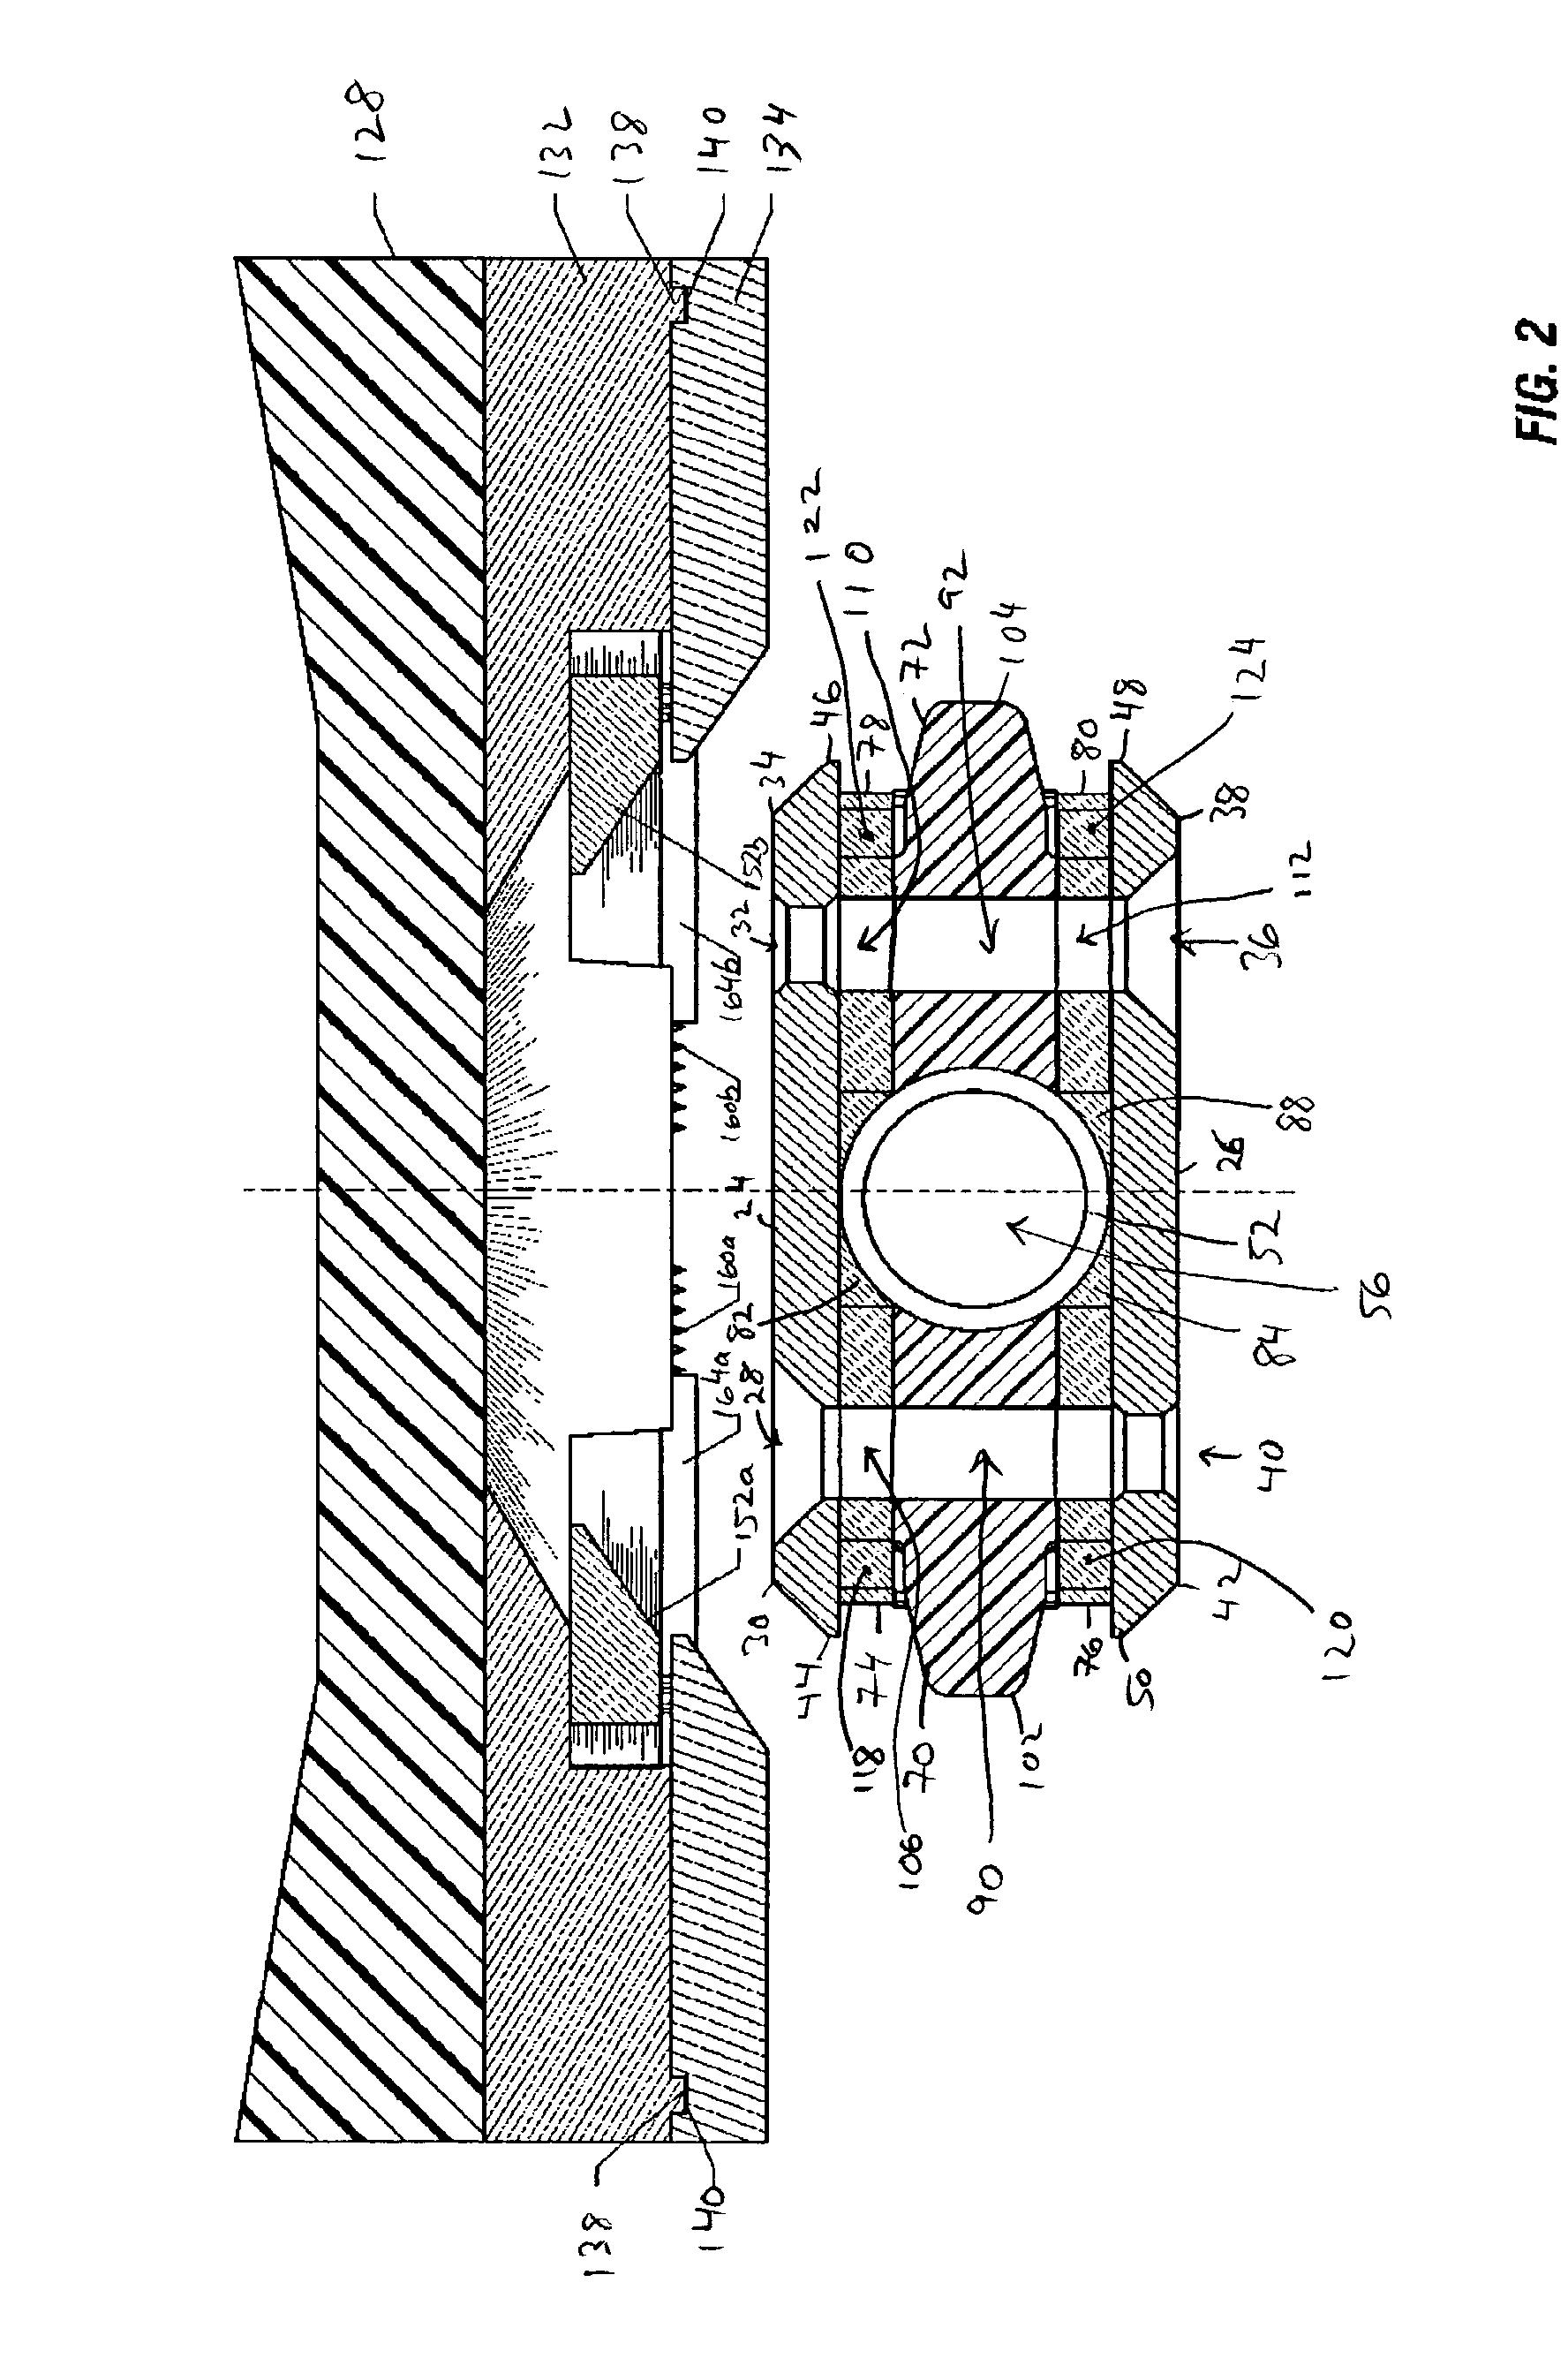 Pedal and related pedal/cleat assembly